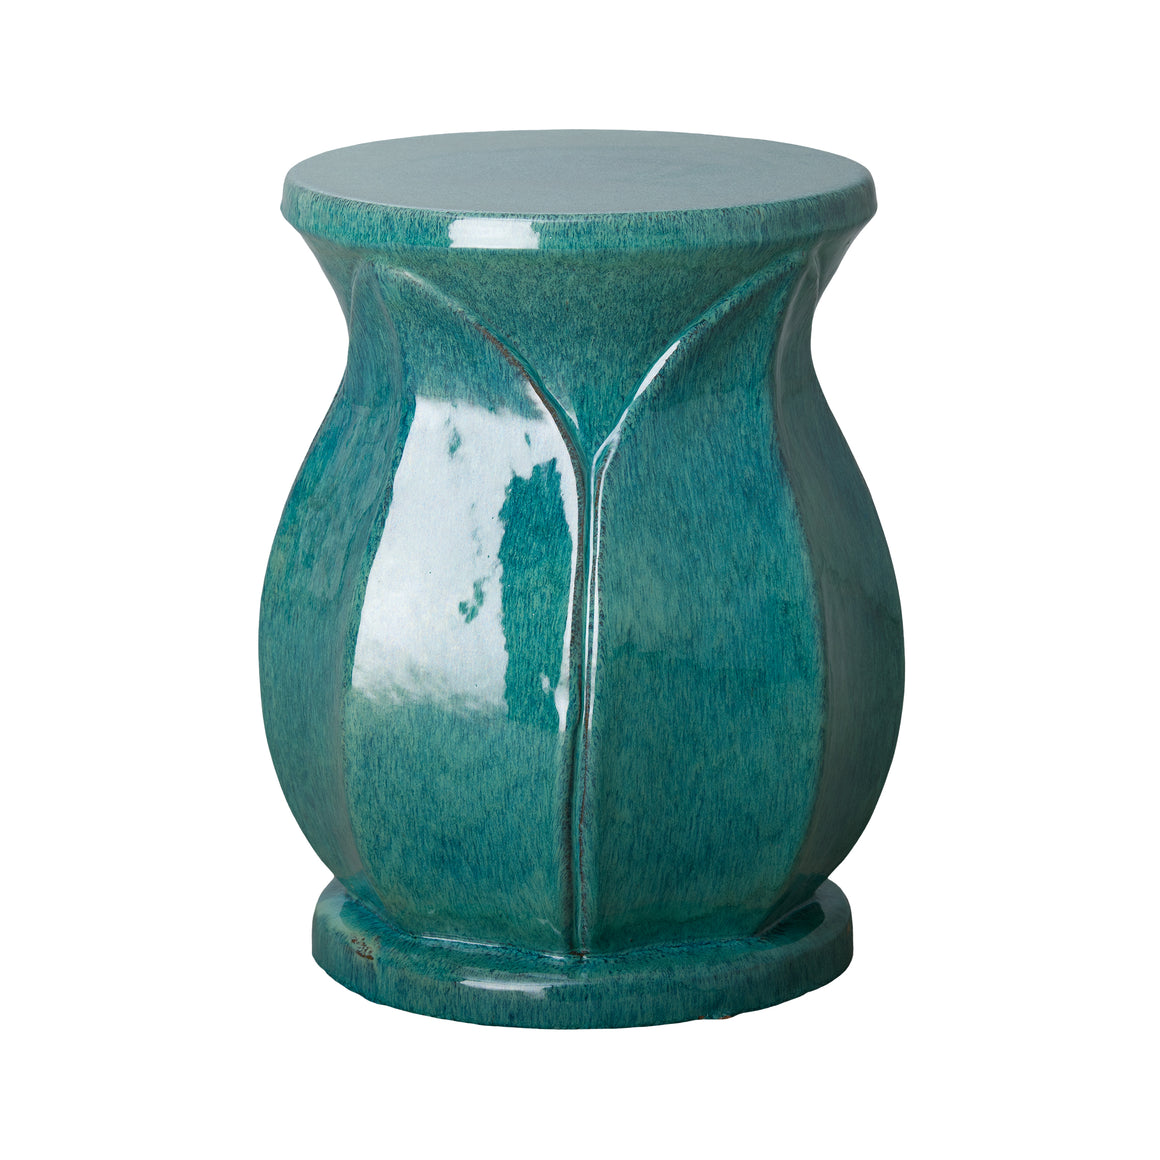 Lotus Ceramic Garden Stool/Table with a Teal Glaze